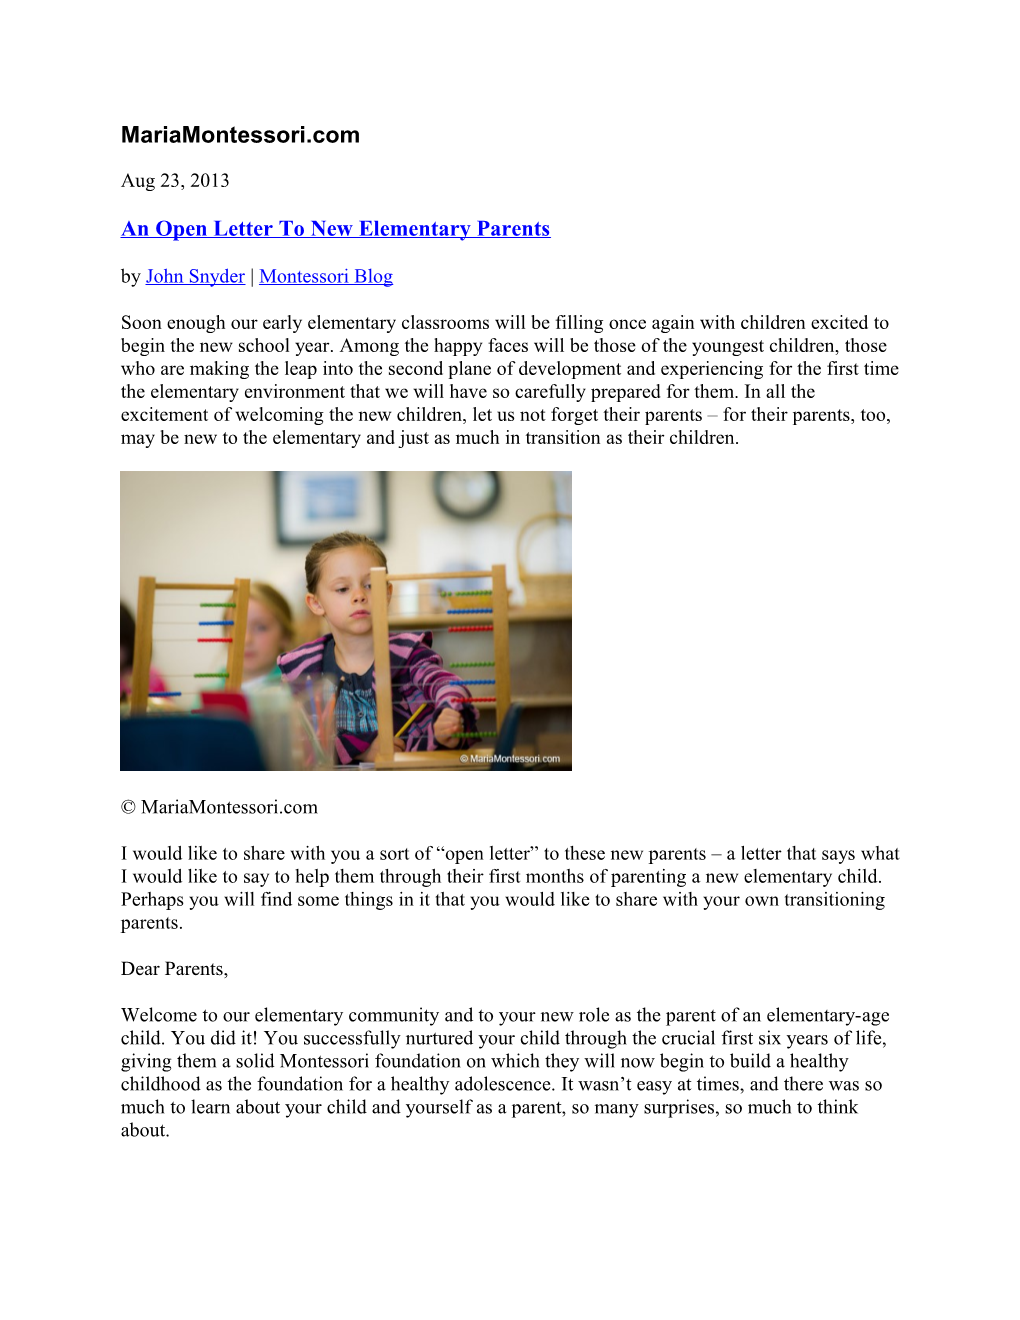 An Open Letter to New Elementary Parents